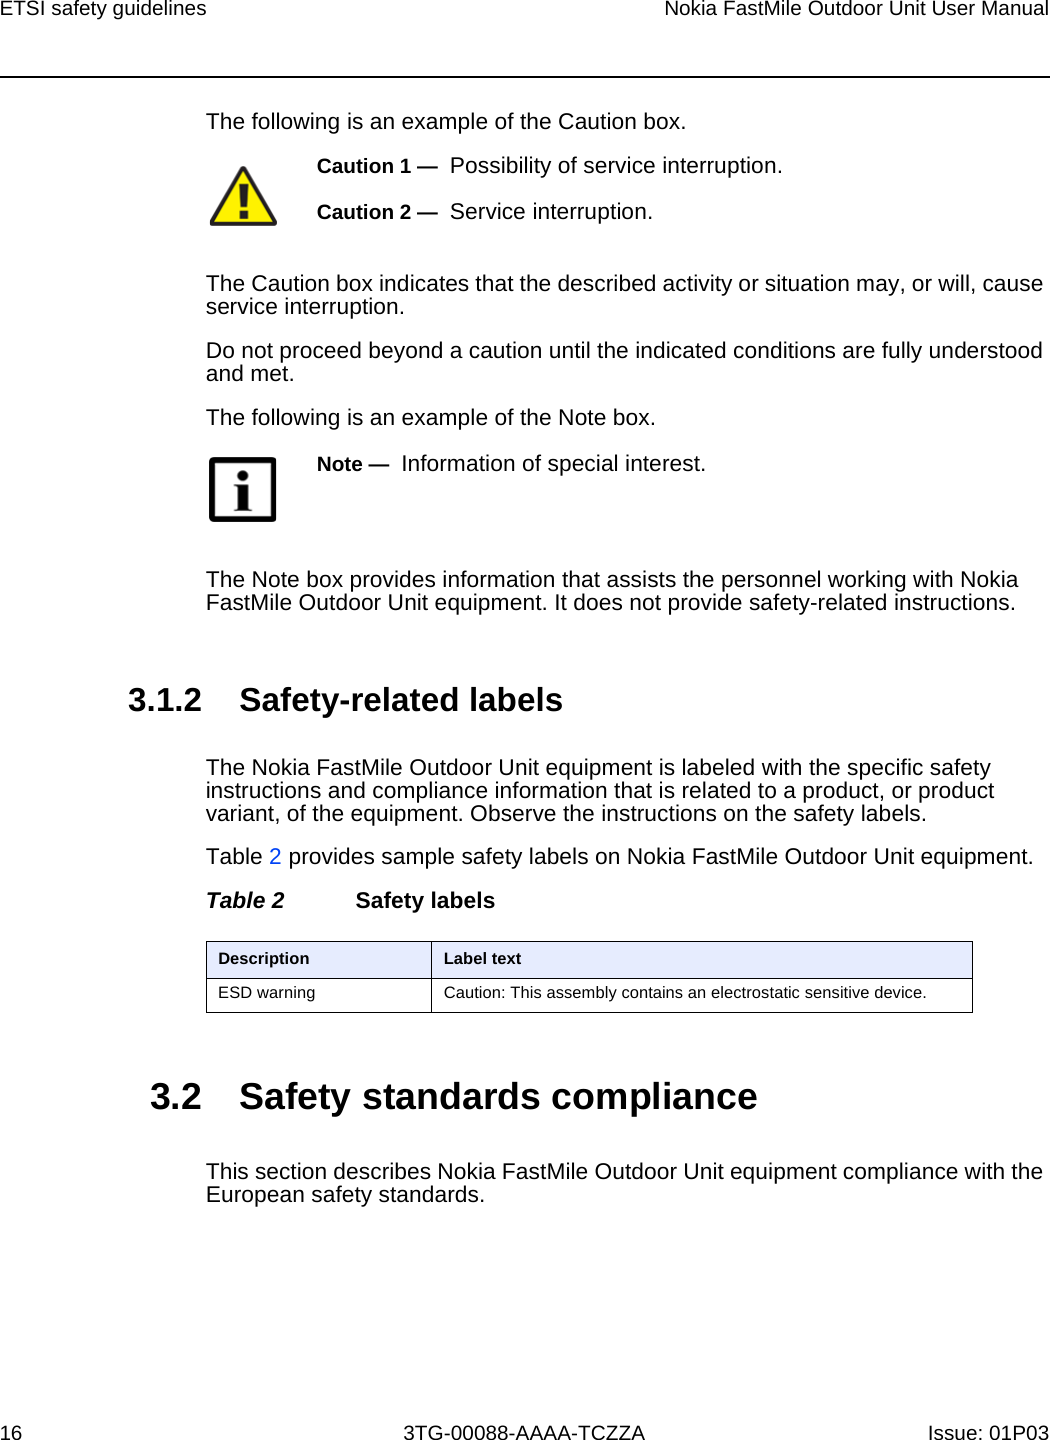 Page 15 of Nokia Bell 34003800FM20 FastMile Compact User Manual Nokia FastMile Outdoor Unit